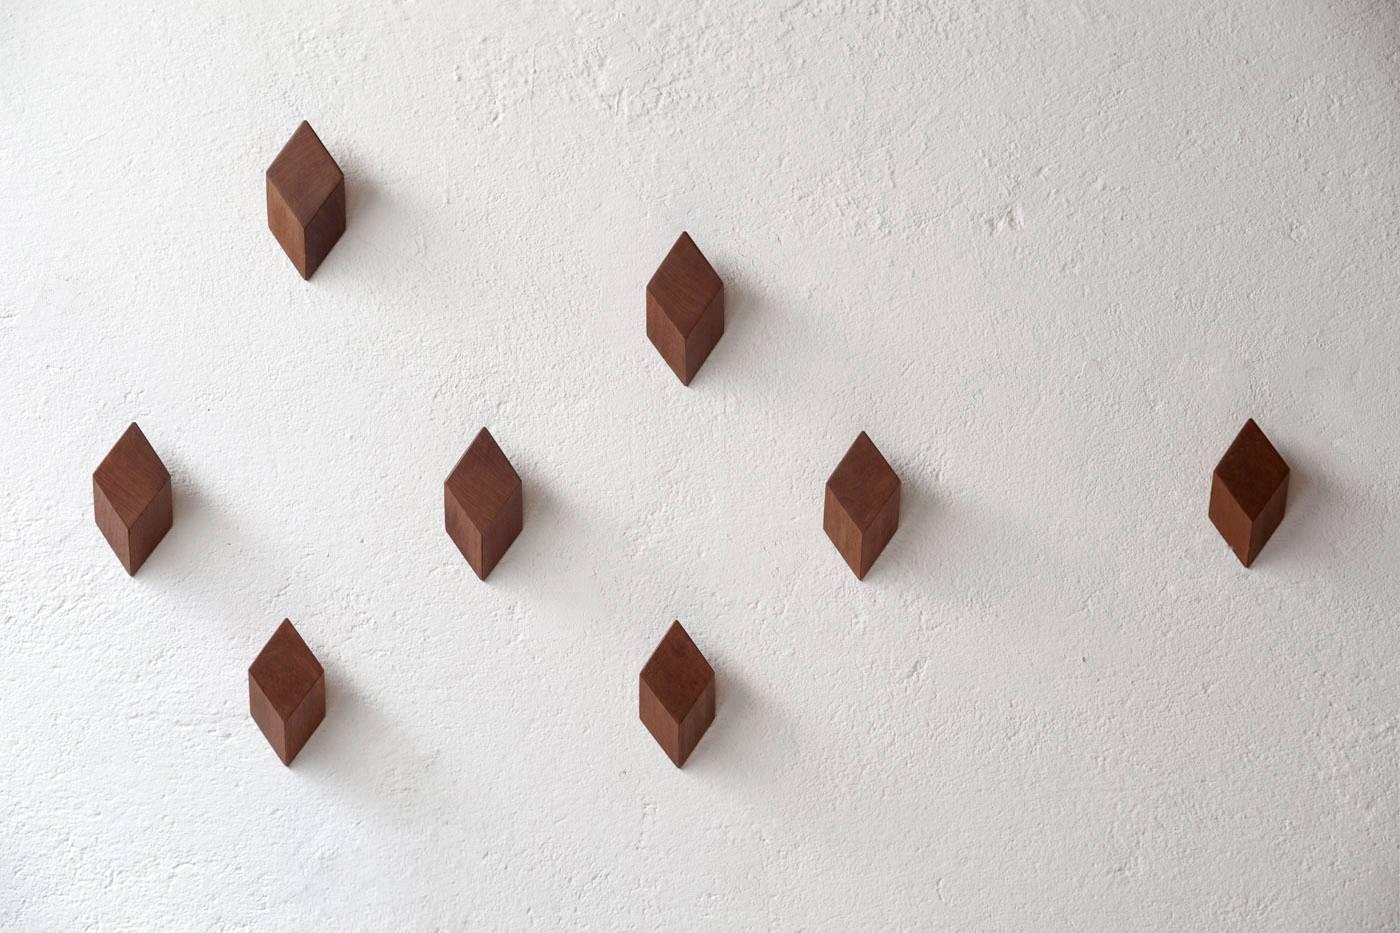 Pipa is a wall hanger inspired by lapidary and its quality to reveal beauty under raw material. The wood is polished by simple and precise cuts.